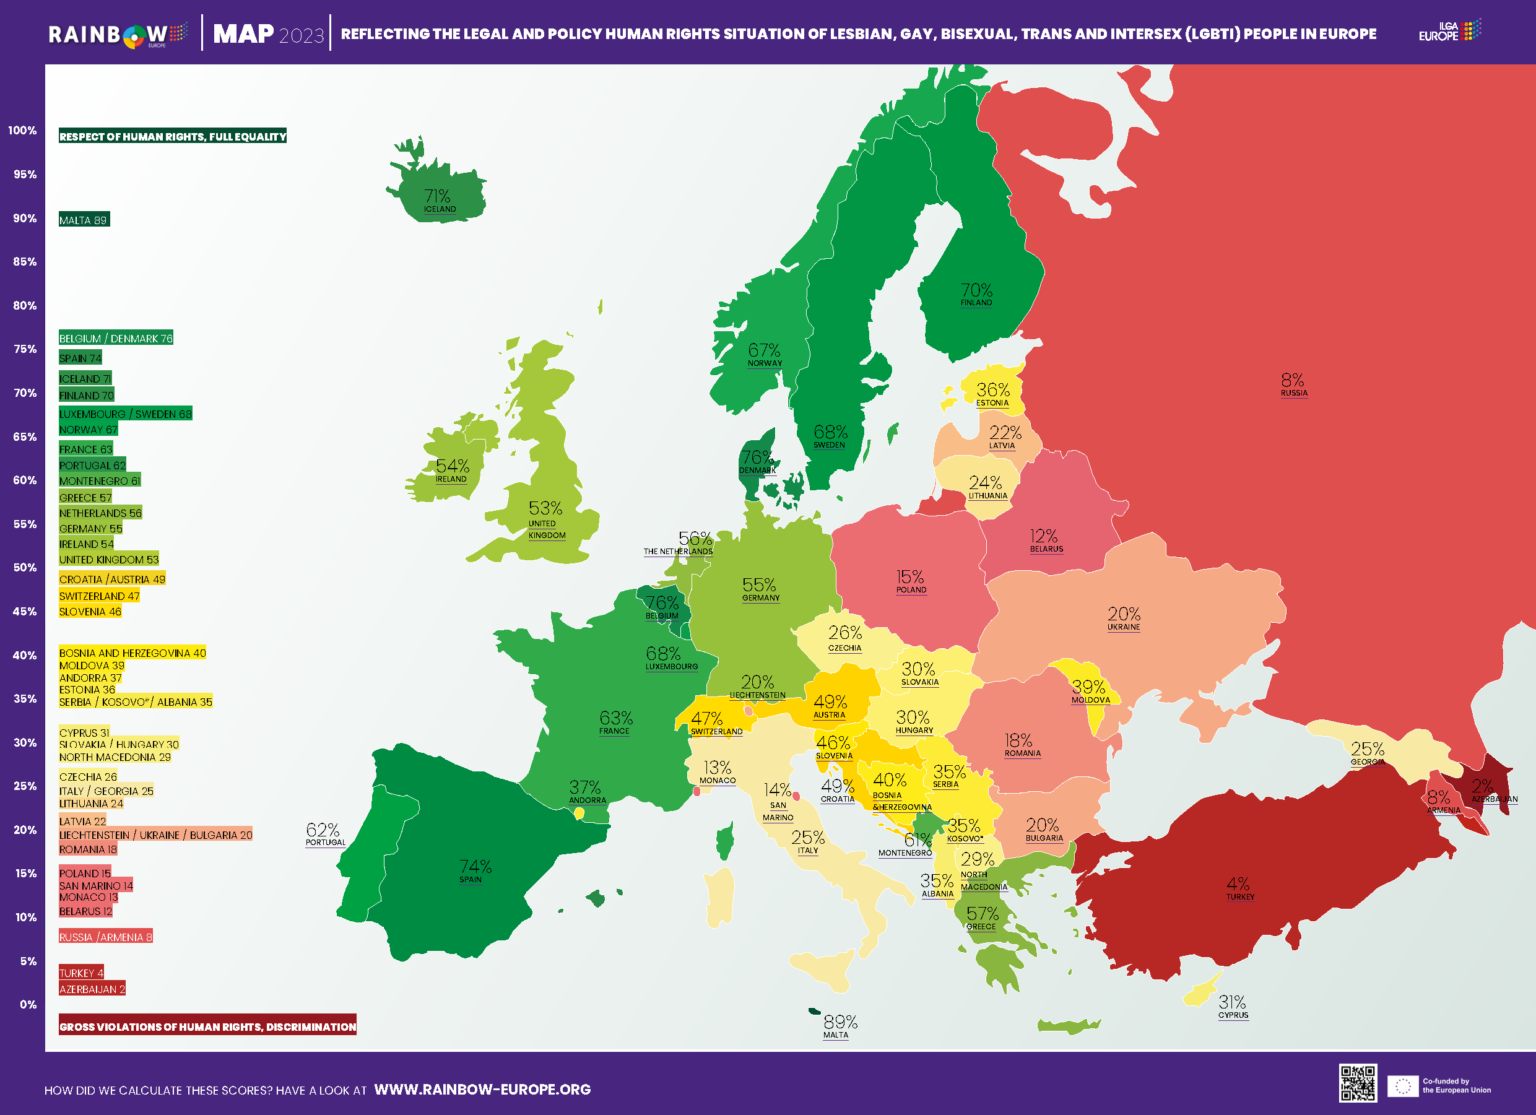 ILGA-Europe's Rainbow Map 2023 showing 0-100% scores of 49 European countries in green, yellow and red colors